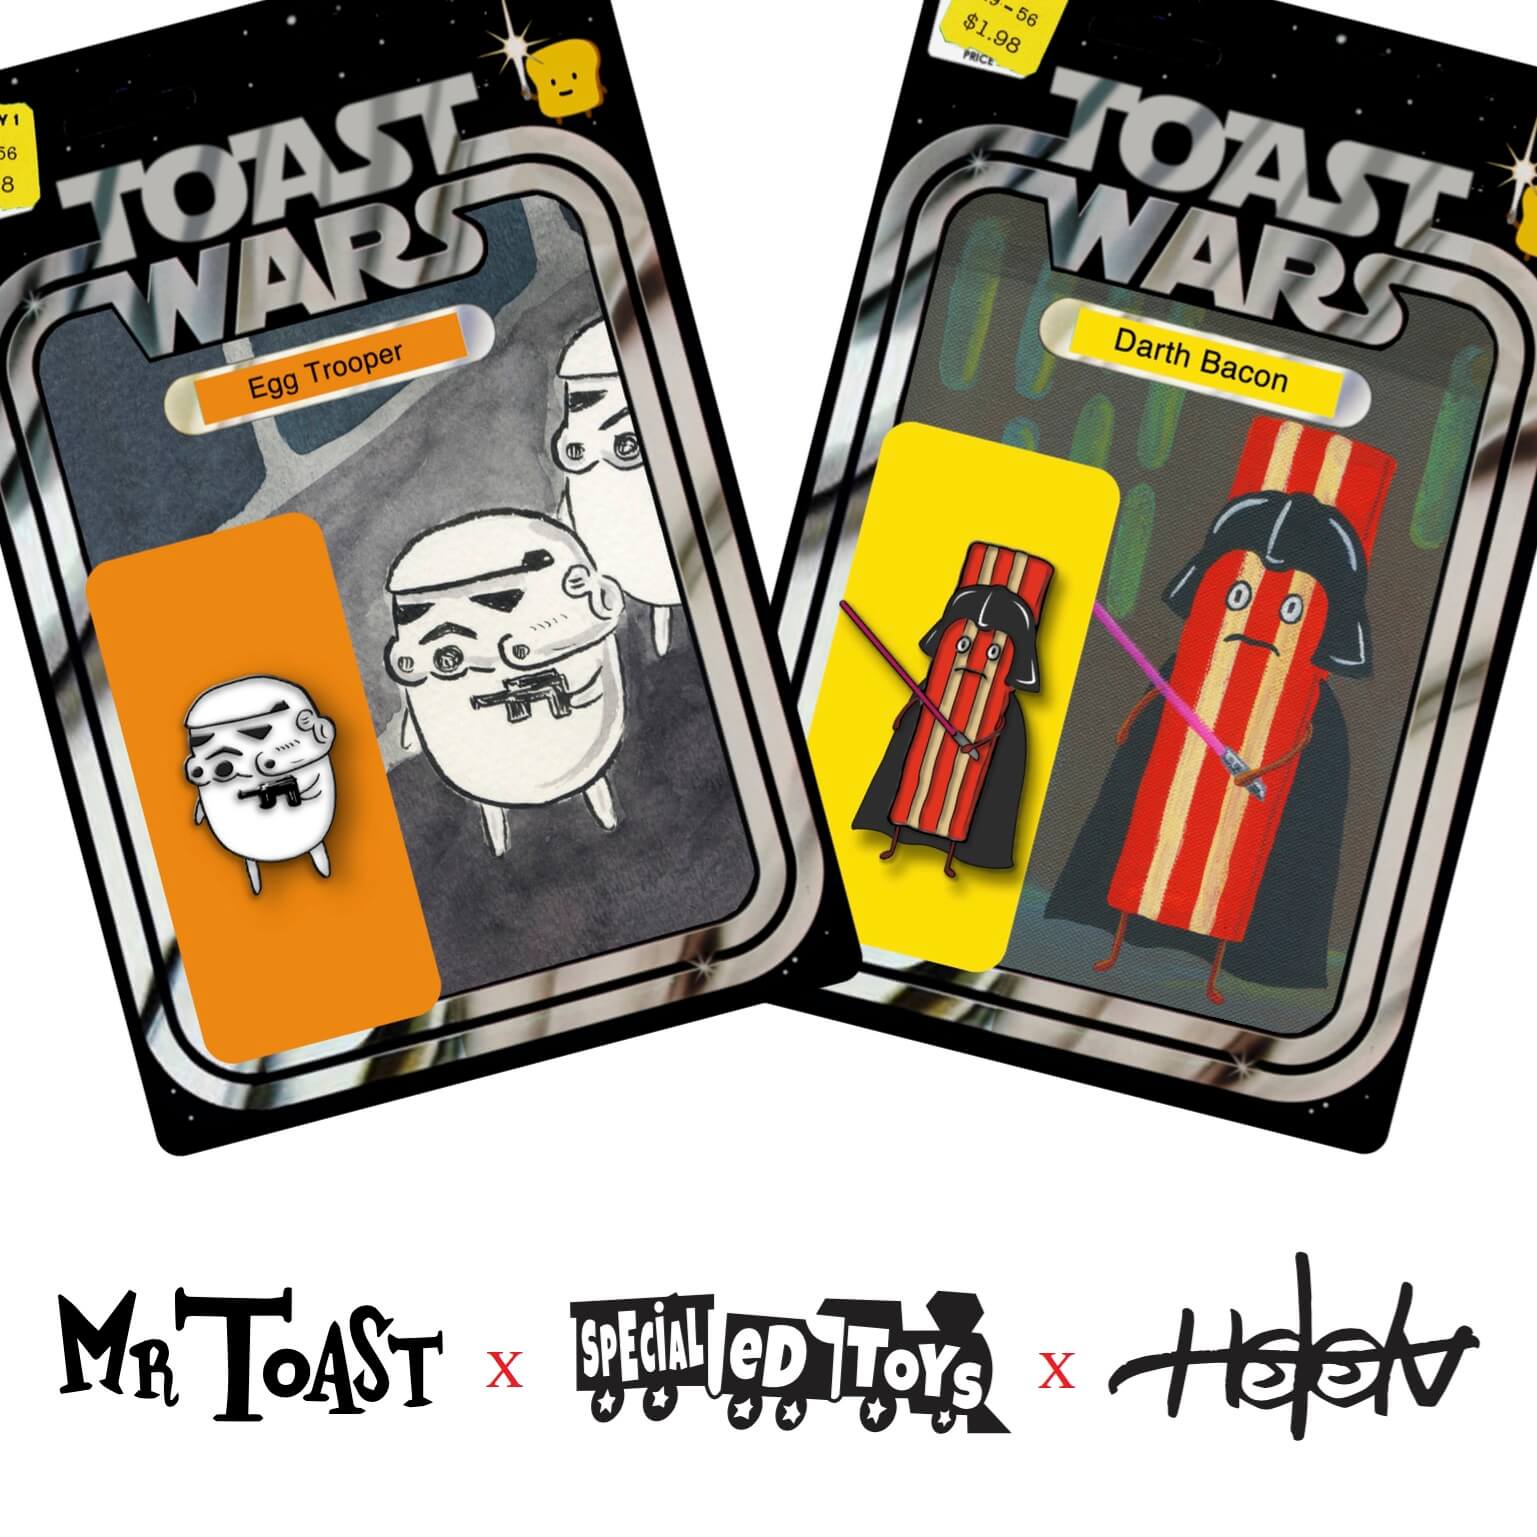 special ed toy mr toast